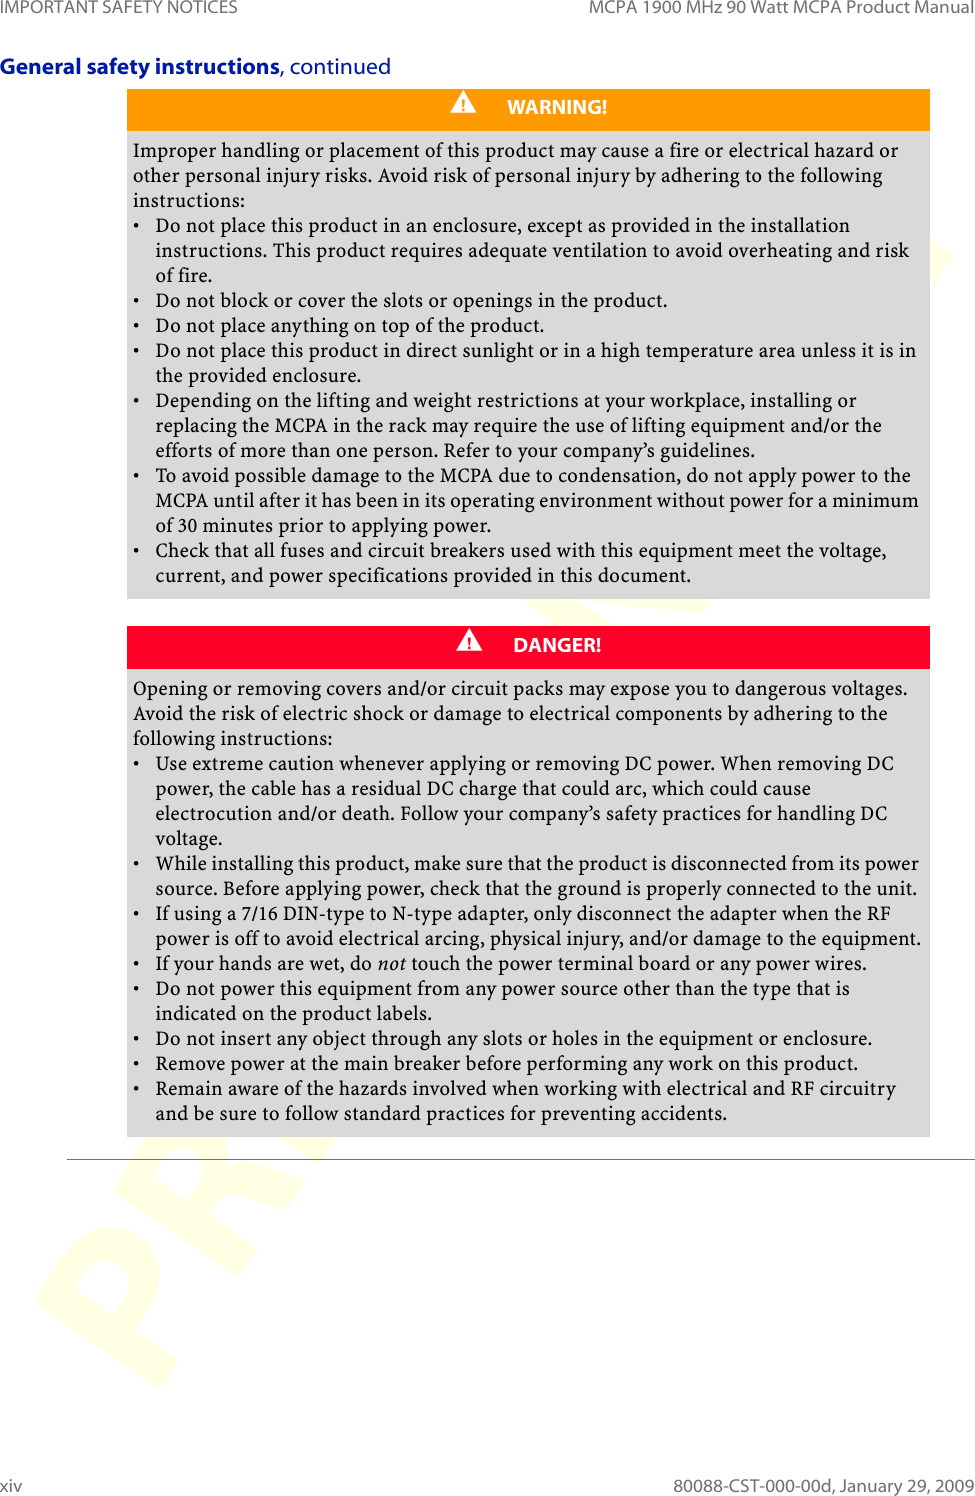 IMPORTANT SAFETY NOTICES MCPA 1900 MHz 90 Watt MCPA Product Manualxiv 80088-CST-000-00d, January 29, 2009General safety instructions, continuedWARNING!Improper handling or placement of this product may cause a fire or electrical hazard or other personal injury risks. Avoid risk of personal injury by adhering to the following instructions:• Do not place this product in an enclosure, except as provided in the installation instructions. This product requires adequate ventilation to avoid overheating and risk of fire.• Do not block or cover the slots or openings in the product.• Do not place anything on top of the product.• Do not place this product in direct sunlight or in a high temperature area unless it is in the provided enclosure.• Depending on the lifting and weight restrictions at your workplace, installing or replacing the MCPA in the rack may require the use of lifting equipment and/or the efforts of more than one person. Refer to your company’s guidelines.• To avoid possible damage to the MCPA due to condensation, do not apply power to the MCPA until after it has been in its operating environment without power for a minimum of 30 minutes prior to applying power.• Check that all fuses and circuit breakers used with this equipment meet the voltage, current, and power specifications provided in this document.DANGER!Opening or removing covers and/or circuit packs may expose you to dangerous voltages. Avoid the risk of electric shock or damage to electrical components by adhering to the following instructions:• Use extreme caution whenever applying or removing DC power. When removing DC power, the cable has a residual DC charge that could arc, which could cause electrocution and/or death. Follow your company’s safety practices for handling DC voltage.• While installing this product, make sure that the product is disconnected from its power source. Before applying power, check that the ground is properly connected to the unit.• If using a 7/16 DIN-type to N-type adapter, only disconnect the adapter when the RF power is off to avoid electrical arcing, physical injury, and/or damage to the equipment.•If your hands are wet, do not touch the power terminal board or any power wires.• Do not power this equipment from any power source other than the type that is indicated on the product labels.• Do not insert any object through any slots or holes in the equipment or enclosure.• Remove power at the main breaker before performing any work on this product.• Remain aware of the hazards involved when working with electrical and RF circuitry and be sure to follow standard practices for preventing accidents.